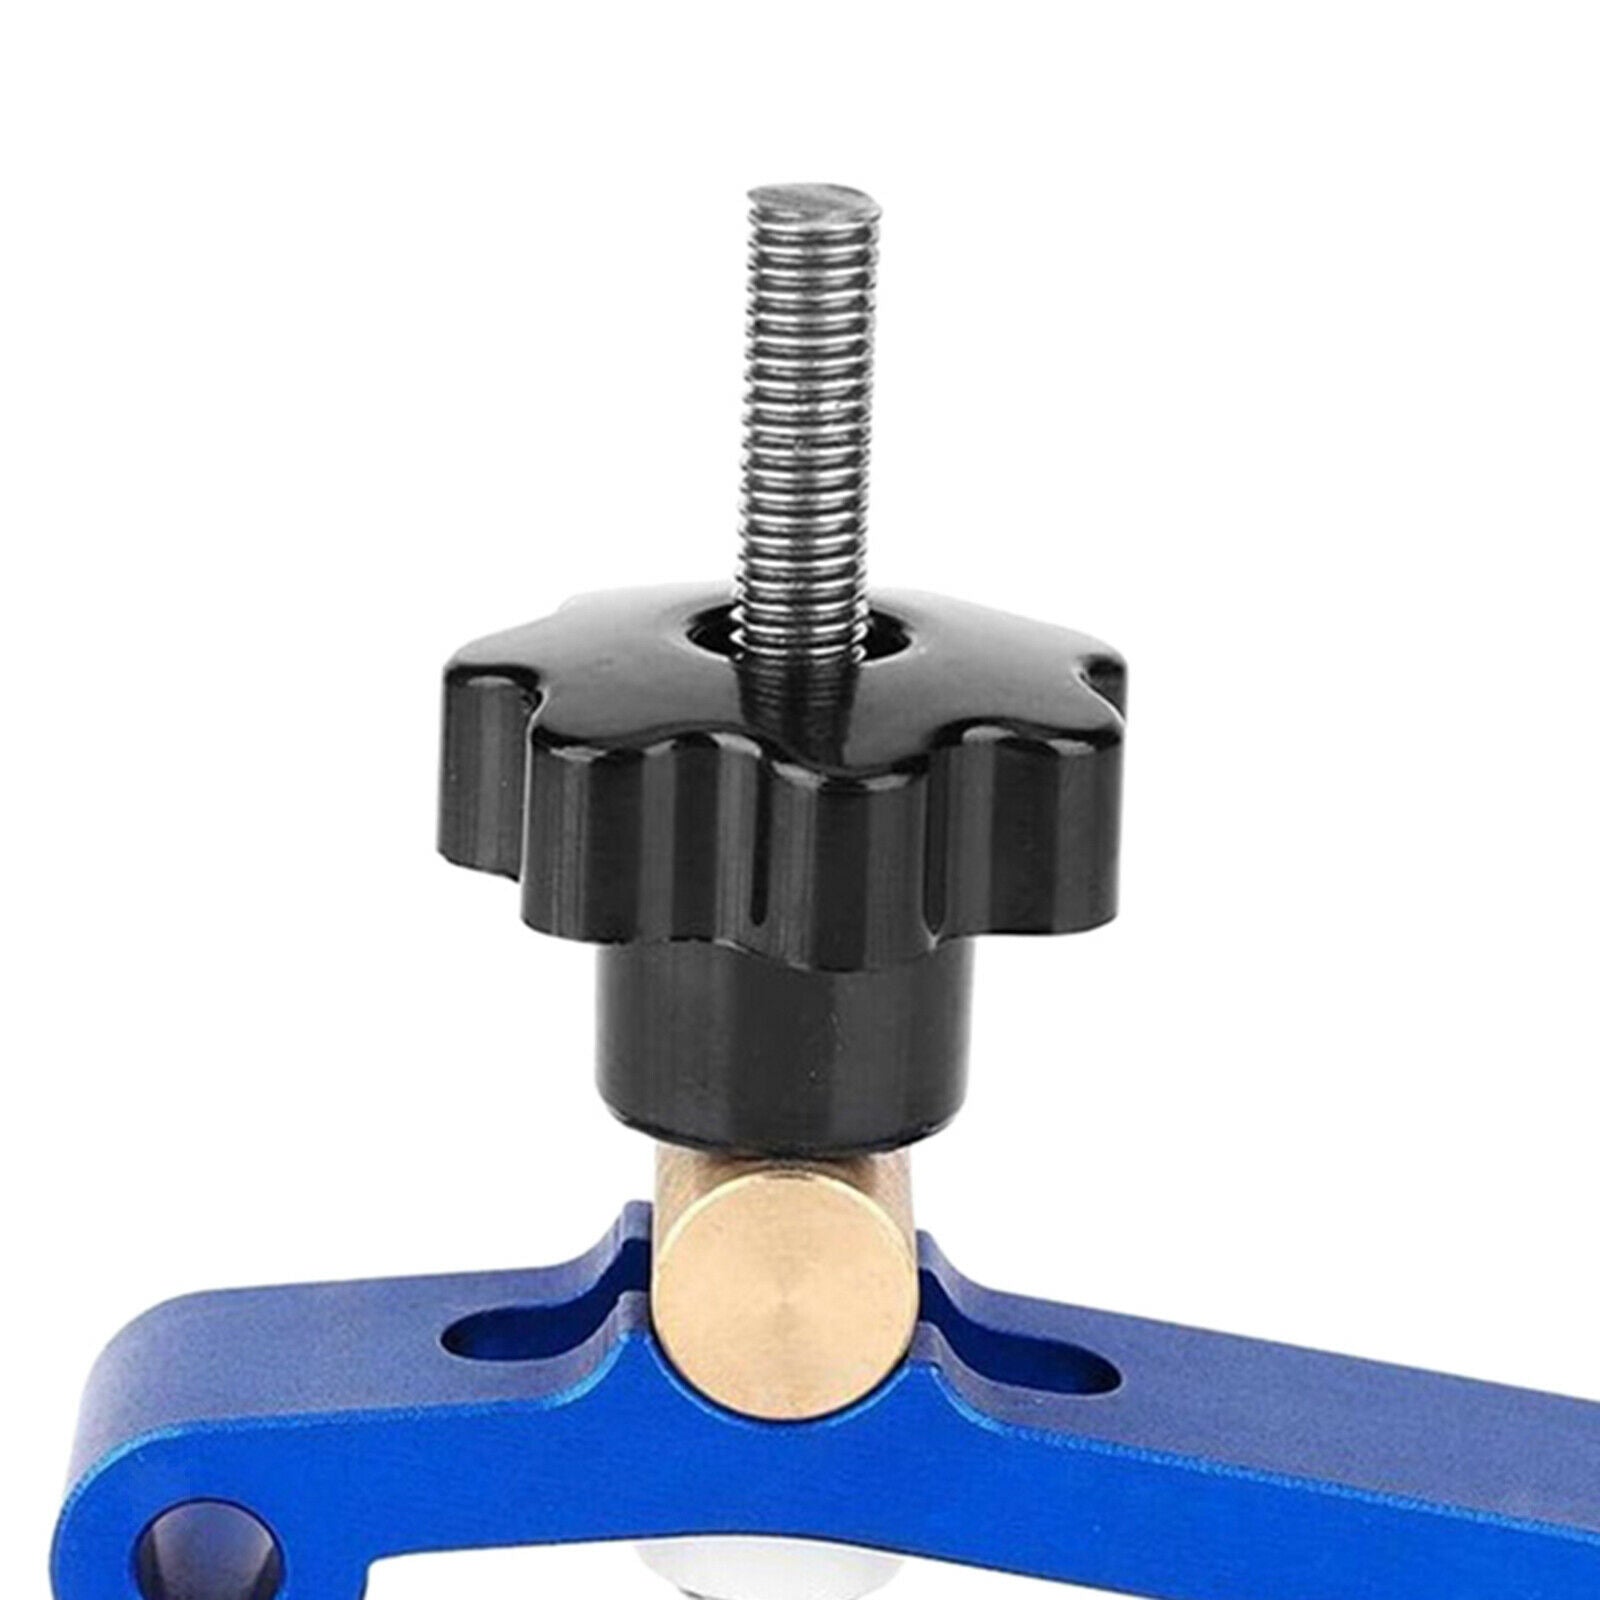 1pc T-track T-slot T Track Jig Fixture Alloy Steel Woodworking Tool Clamp